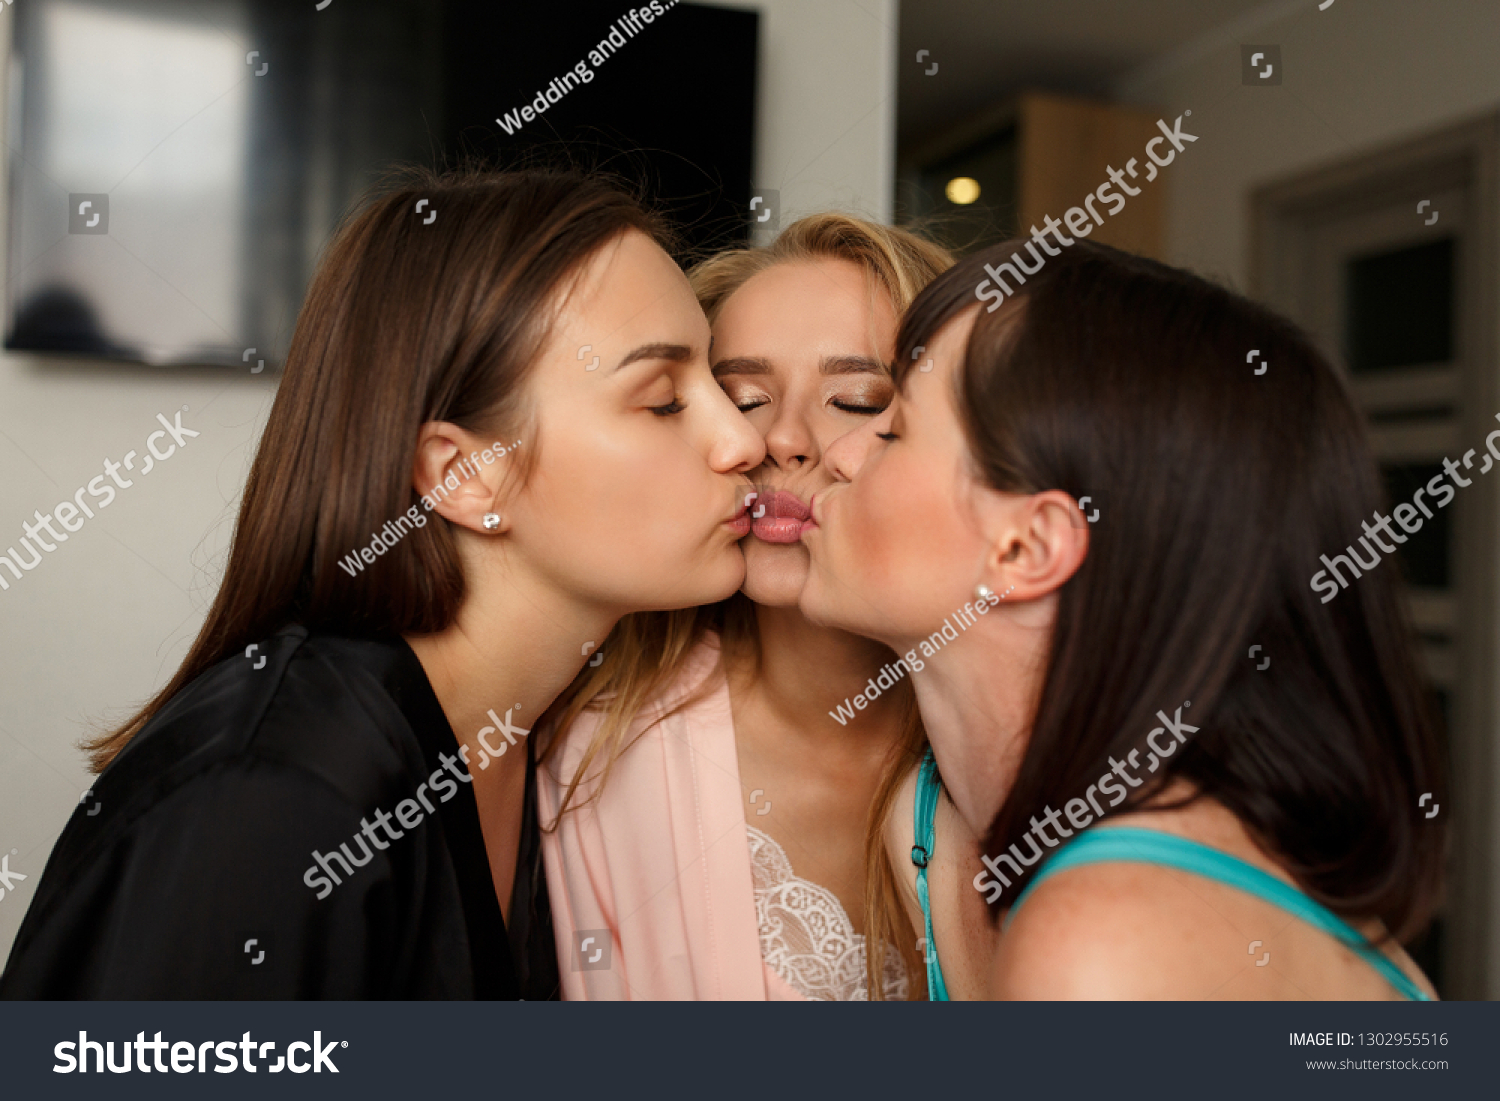 2 women making out